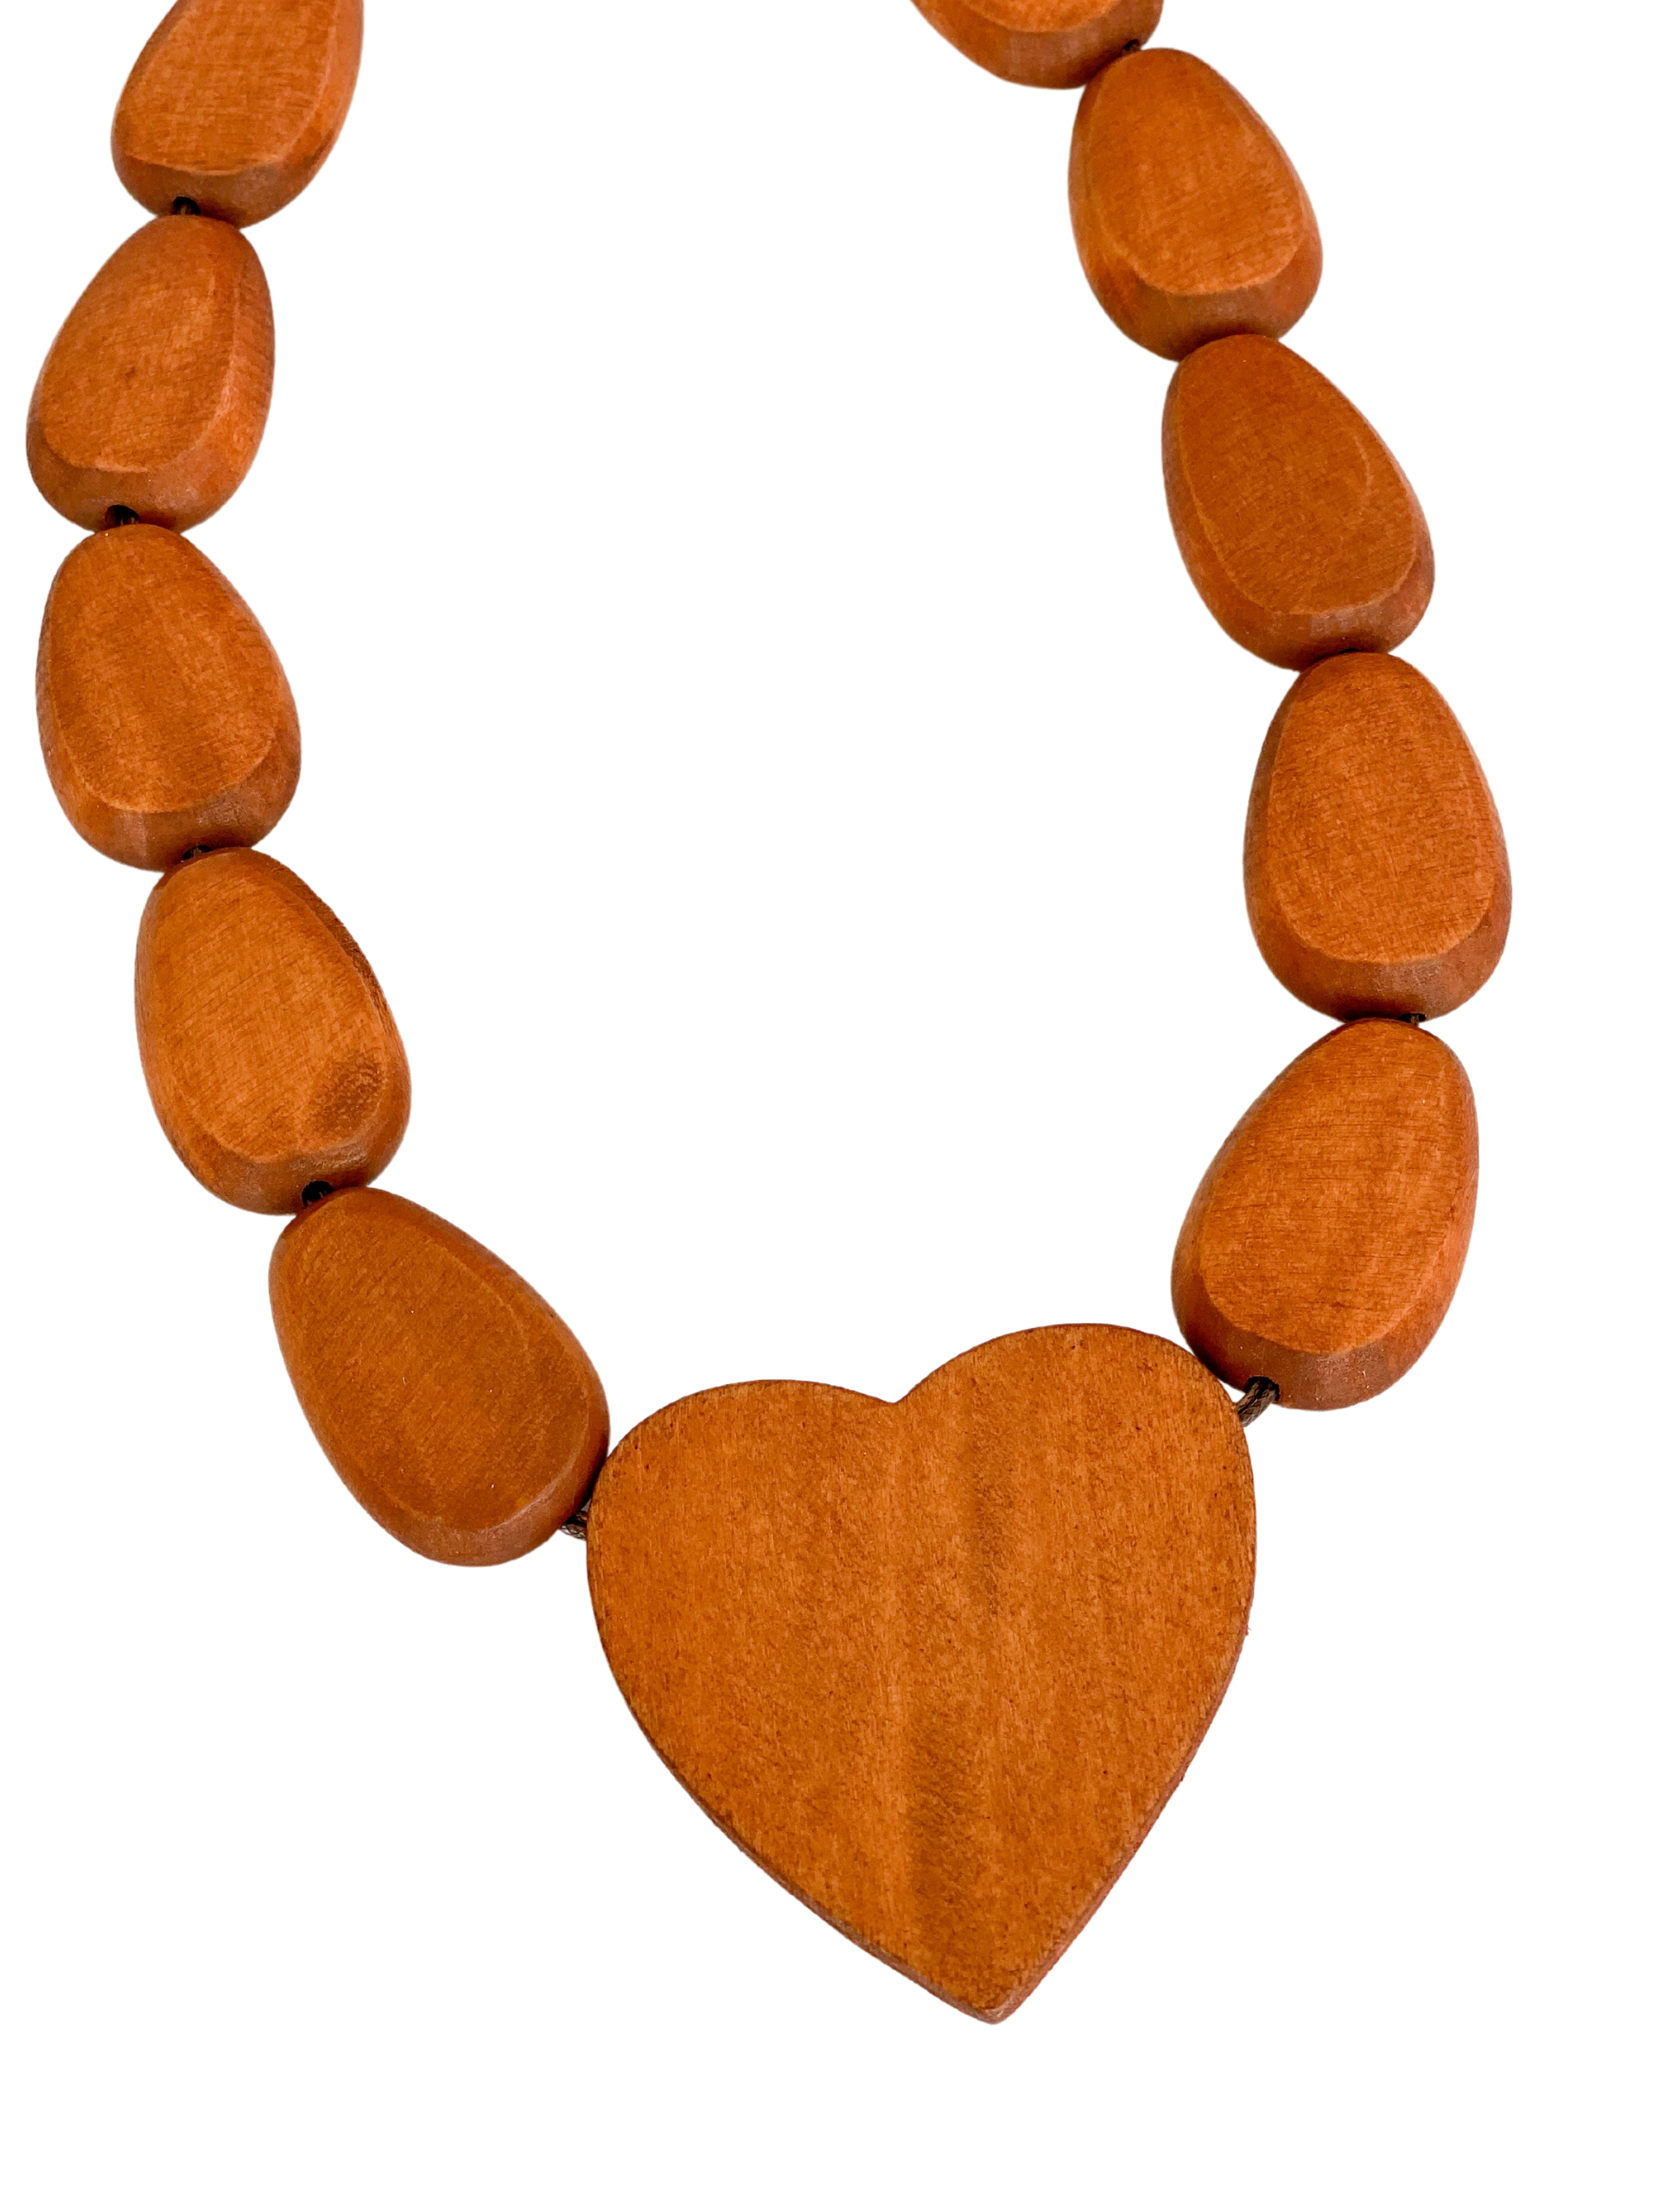 Hand crafted custom light wooden heart cremation urn necklaces